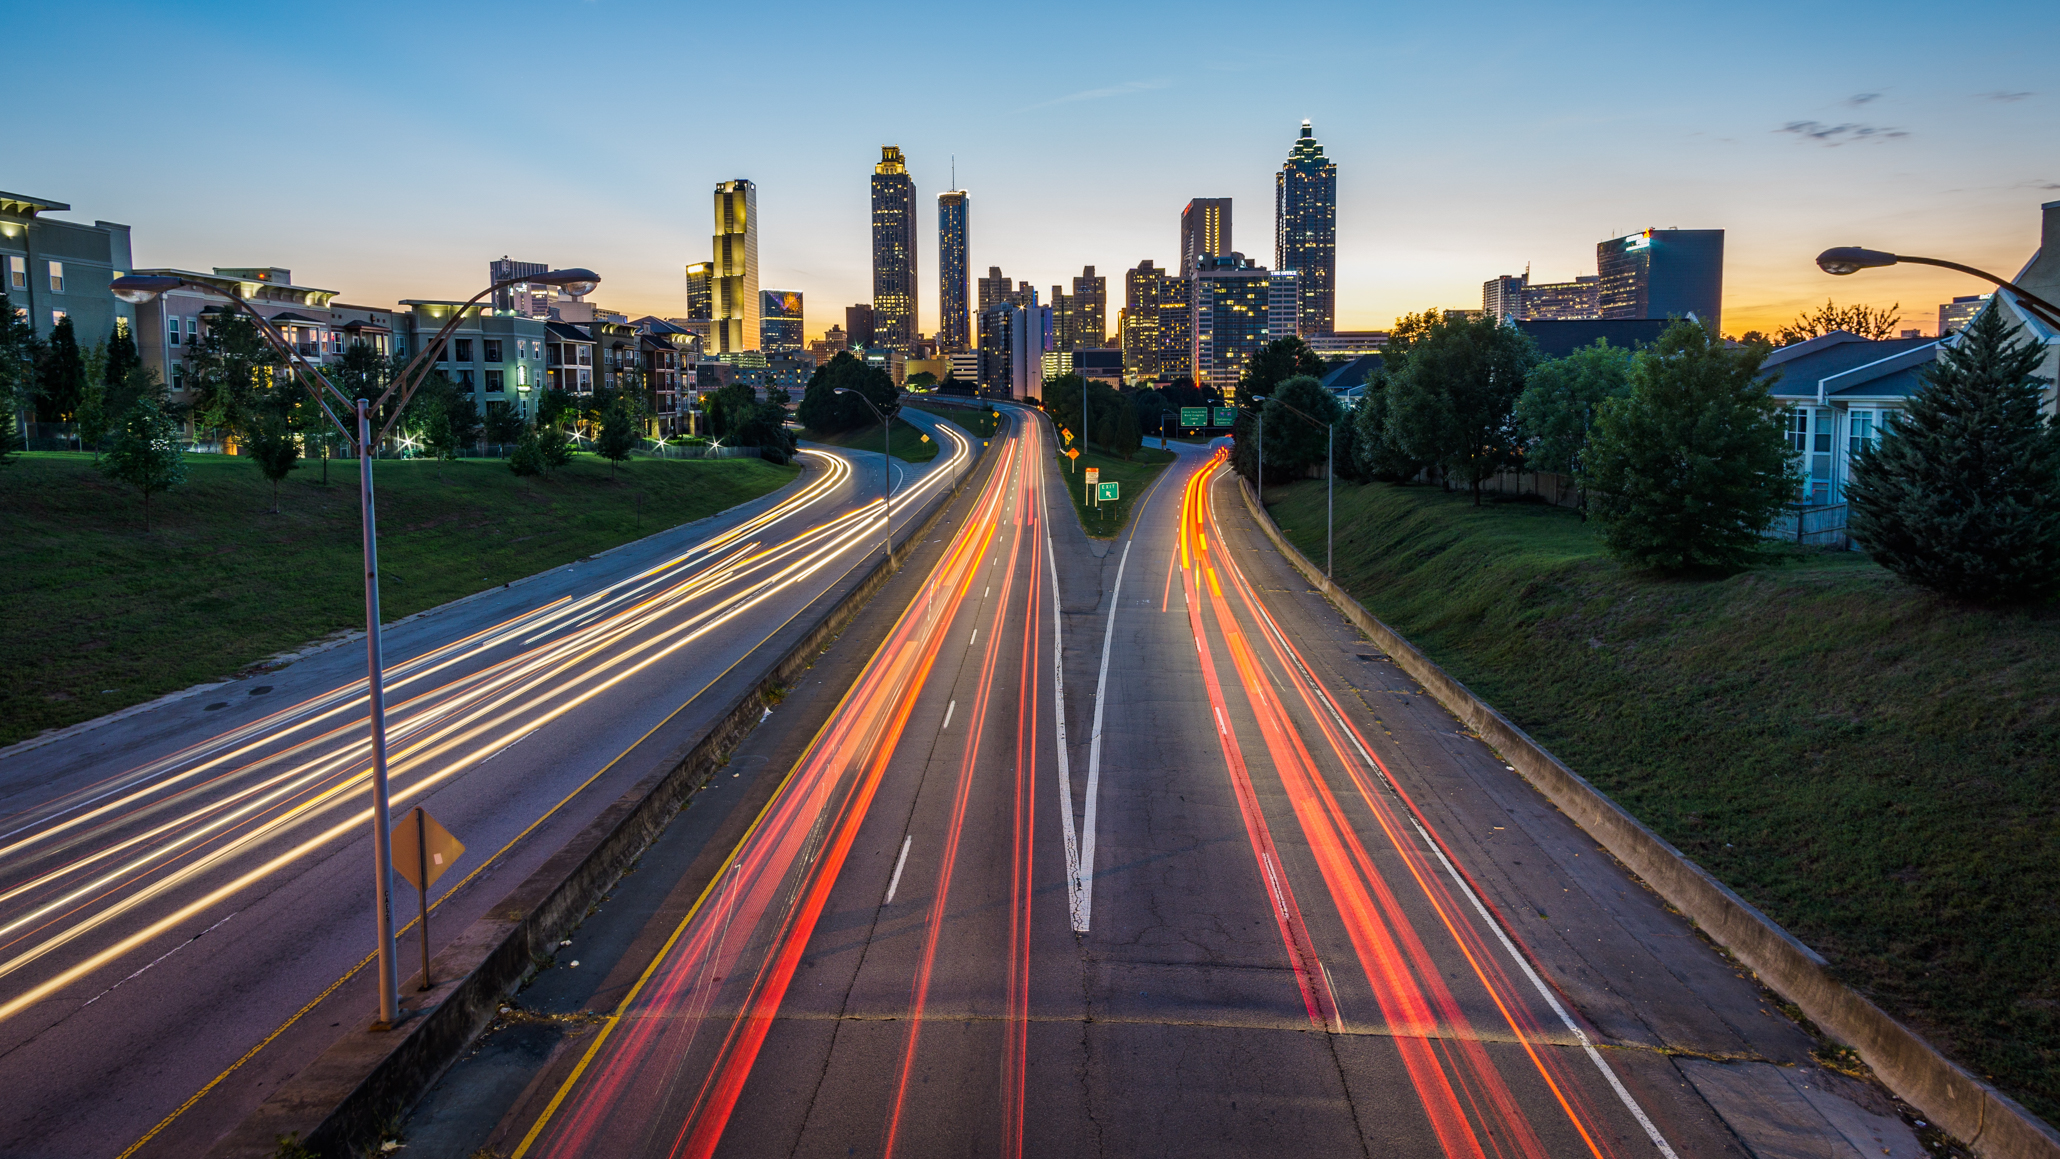 Smart cities employ sensors, digital technology, and communications networks to make daily life more efficient. The normalization of smart homes should improve the ease in which smart cities can proliferate. Image: Joey Kyber on Unsplash.